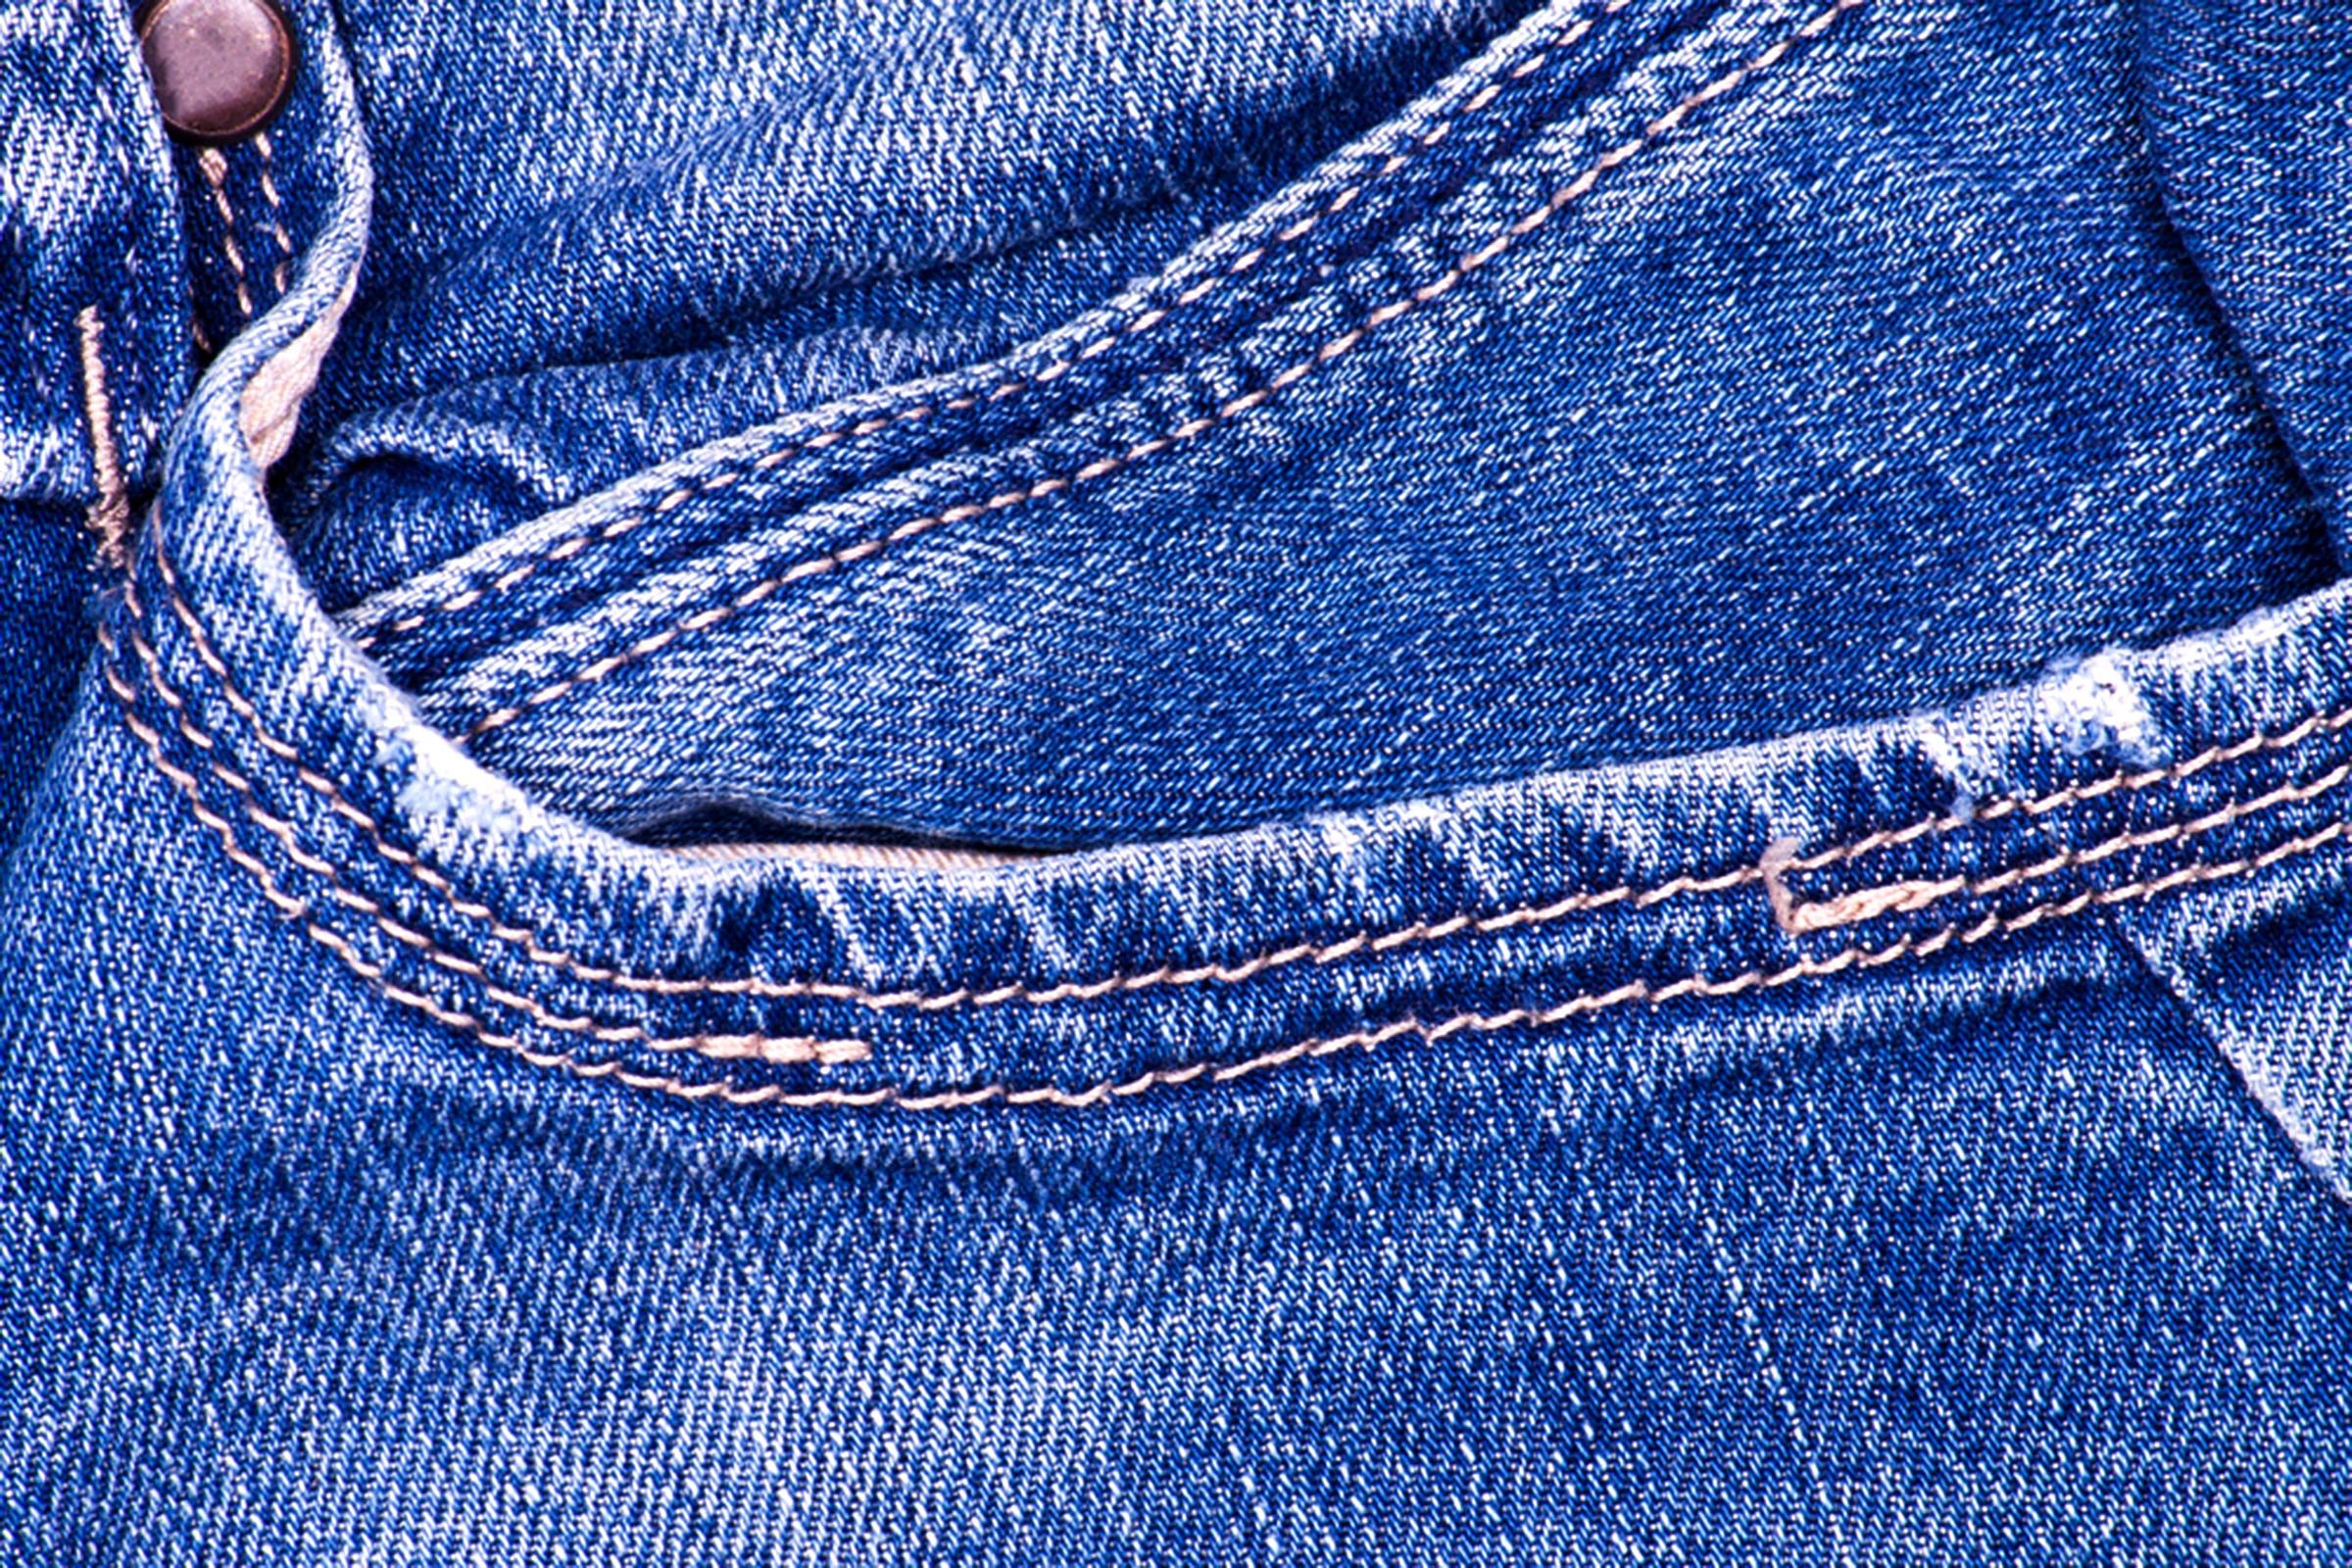 Why-Do-Jeans-Have-Those-Tiny-Pockets